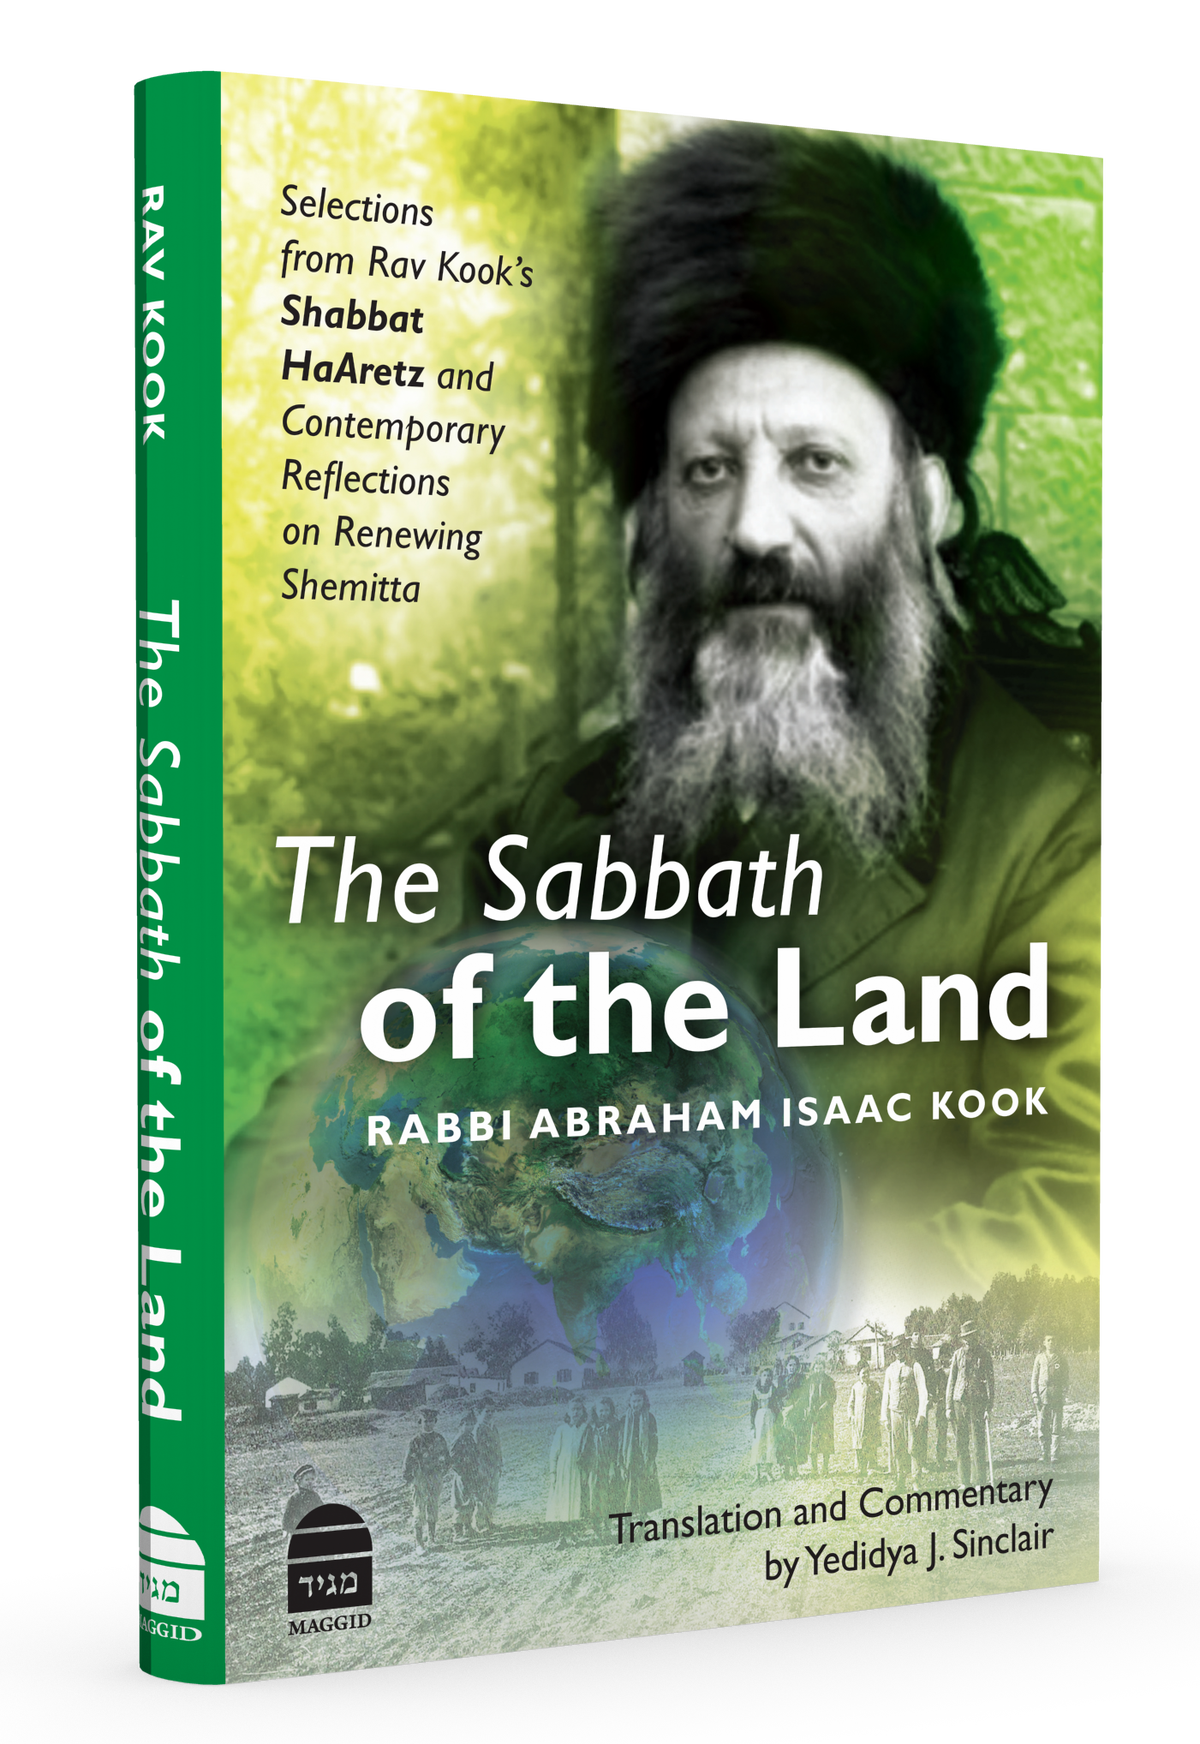 Torah of the Earth: A Shabbat of the Land